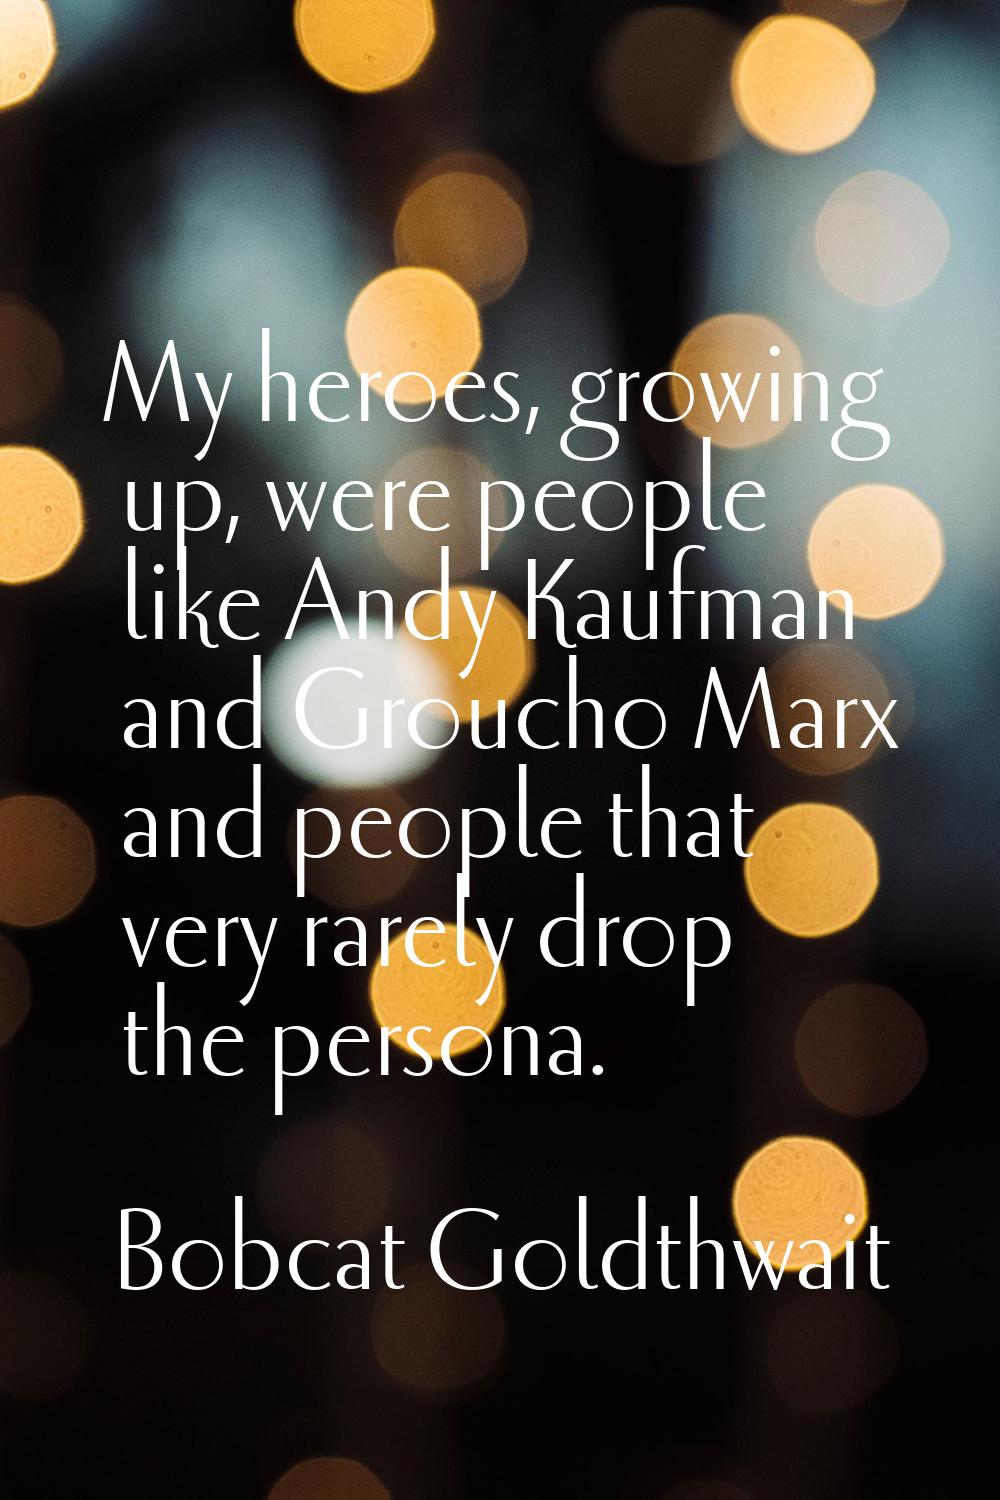 My heroes, growing up, were people like Andy Kaufman and Groucho Marx and people that very rarely d